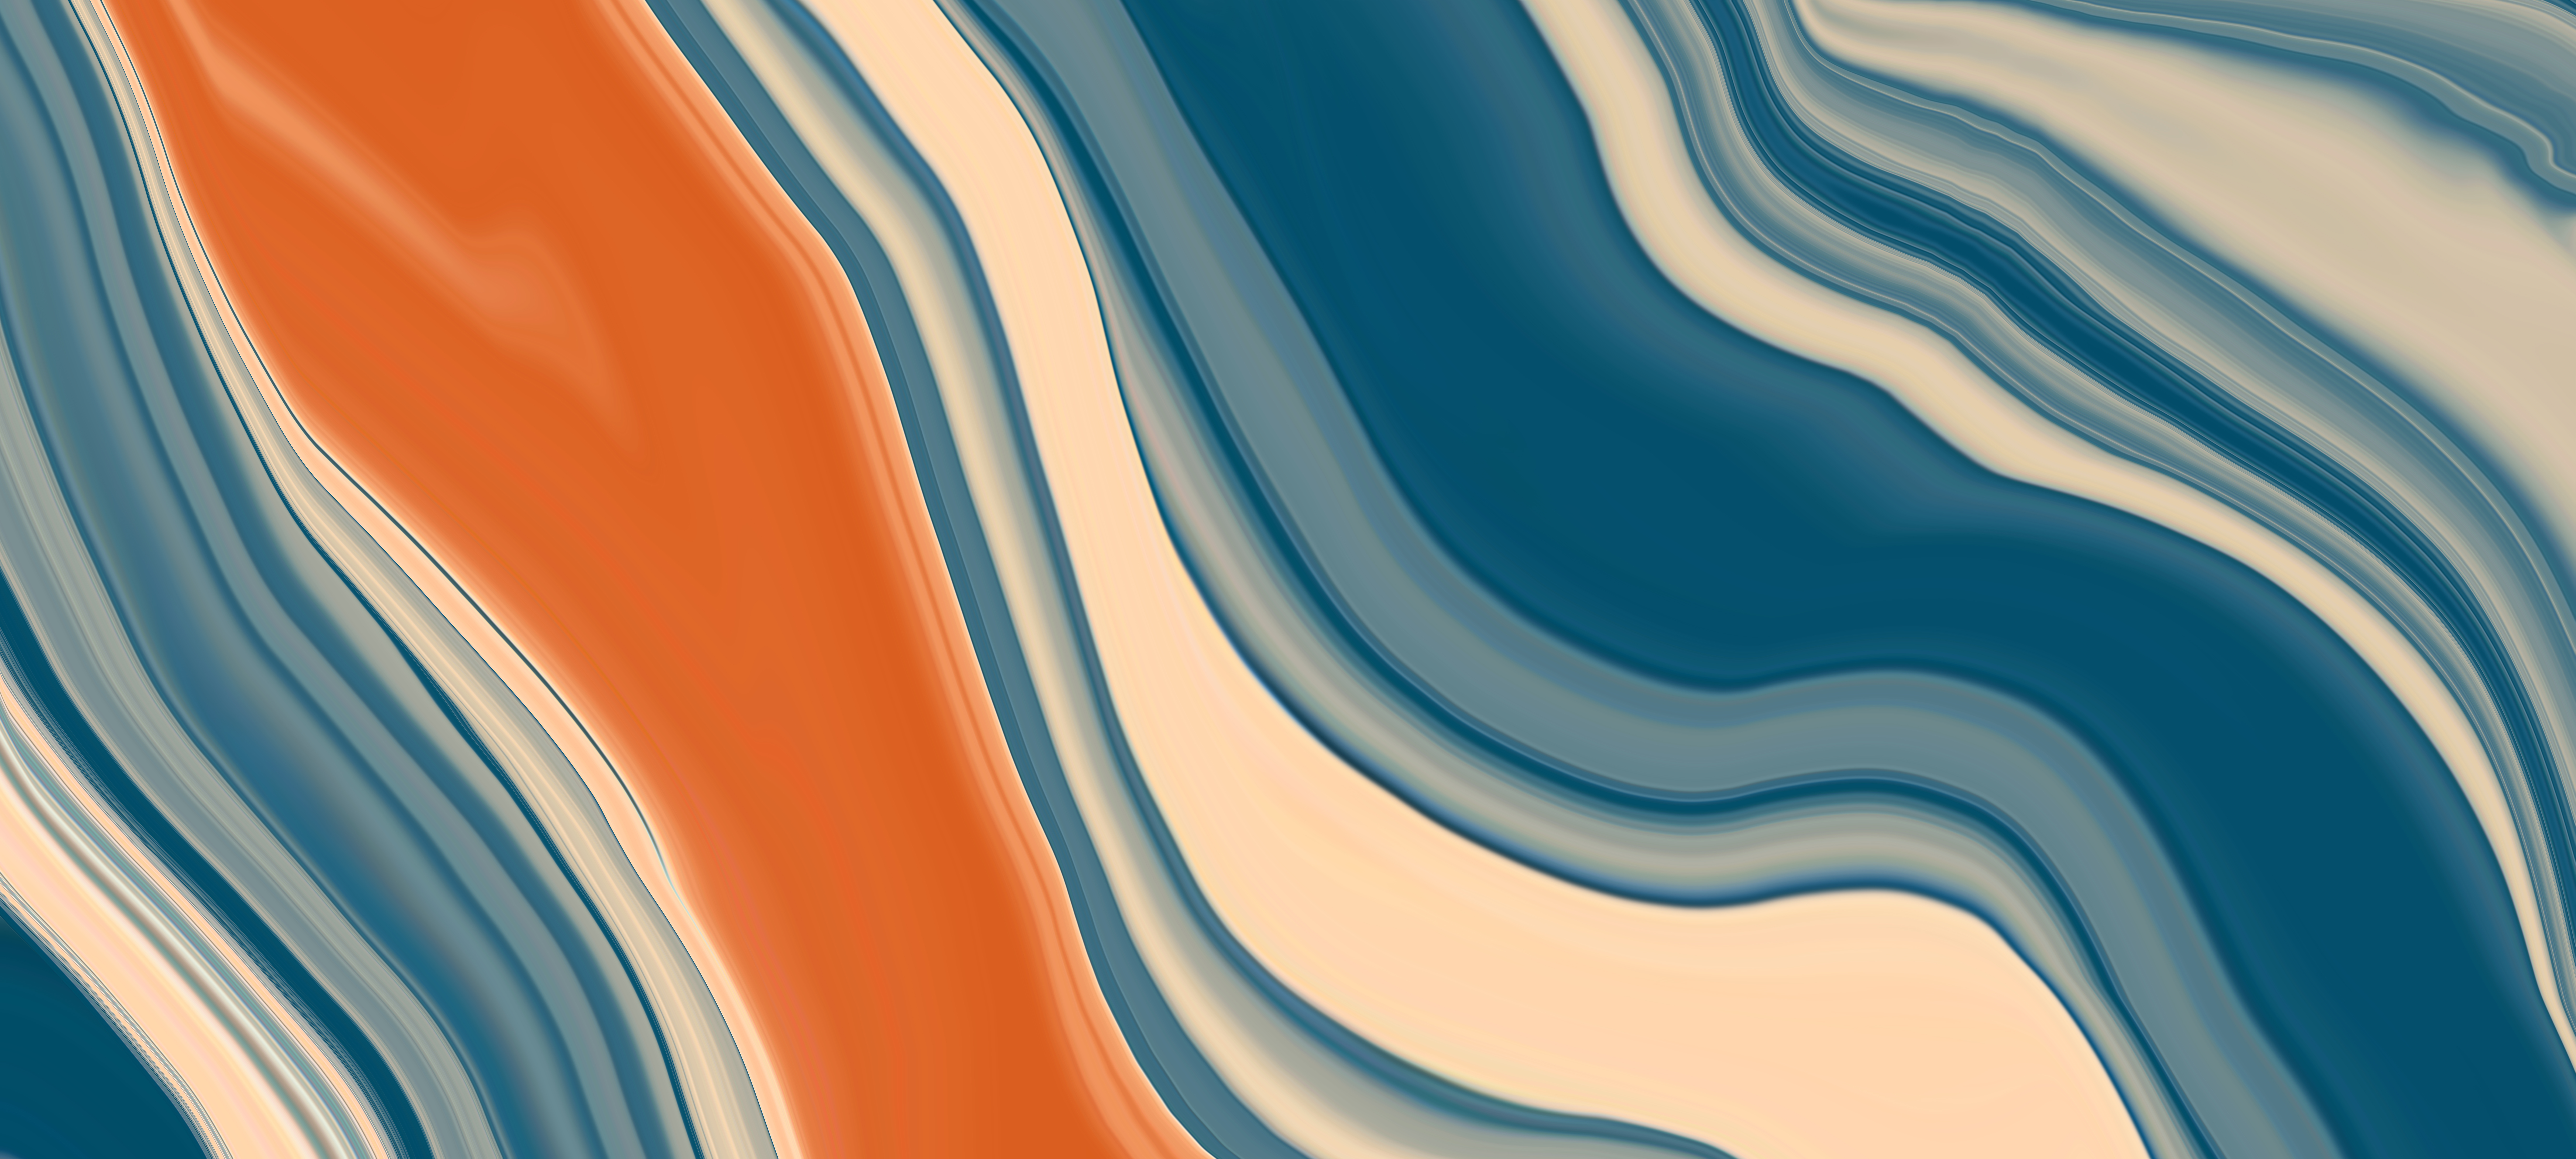 General 10750x4838 abstract fluid digital art colorful line art simple background wide angle wide screen